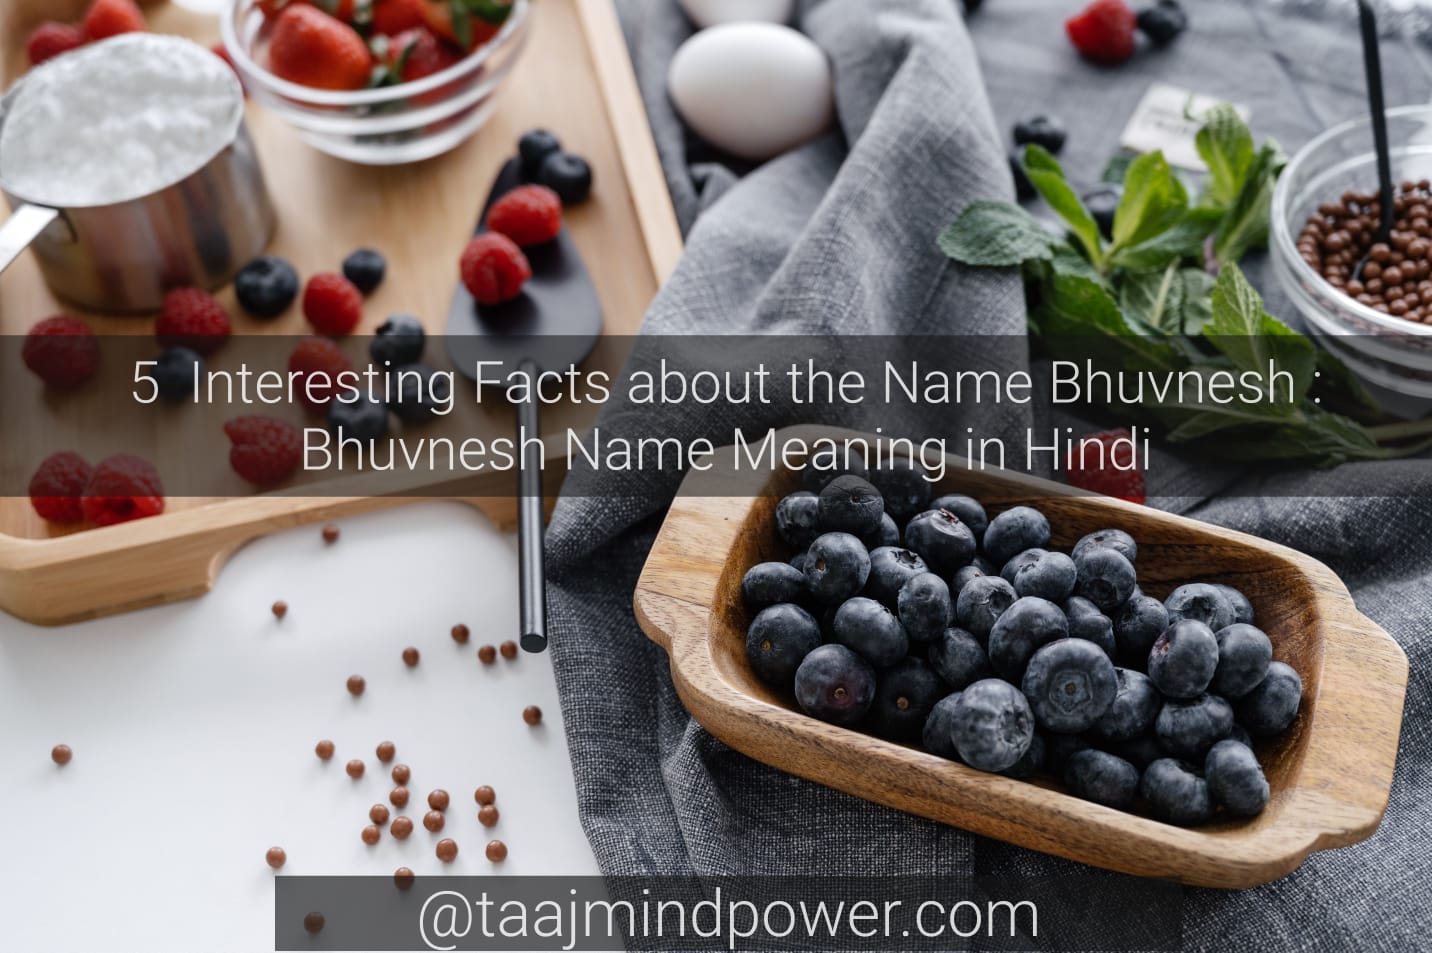 Bhuvnesh Name Meaning in Hind